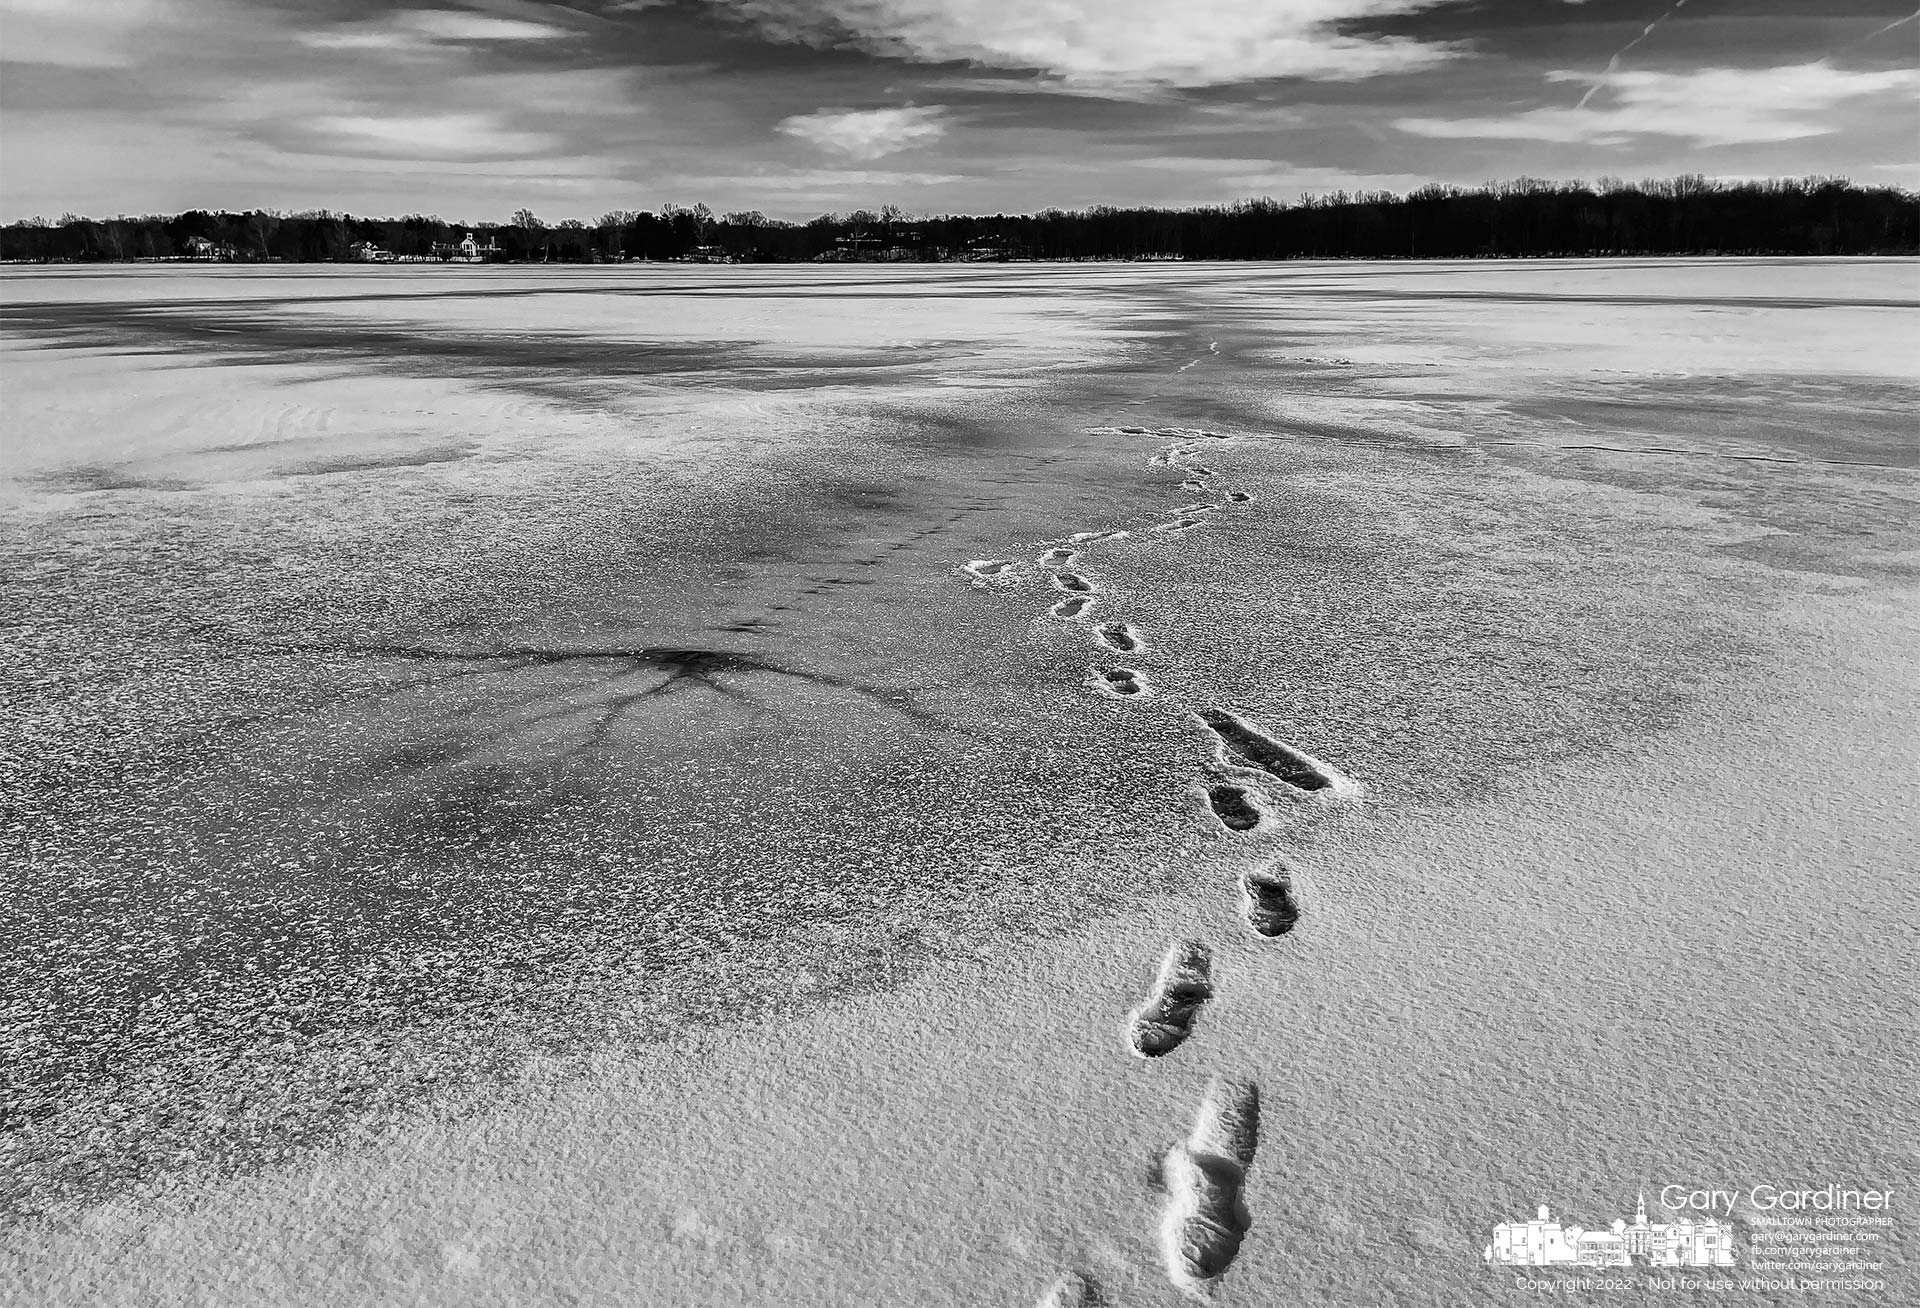 A set of tracks lead to the shore from the frozen and snow-covered surface of Hoover Reservoir at Rad Bank Park. My Final Photo for Jan. 27, 2022.